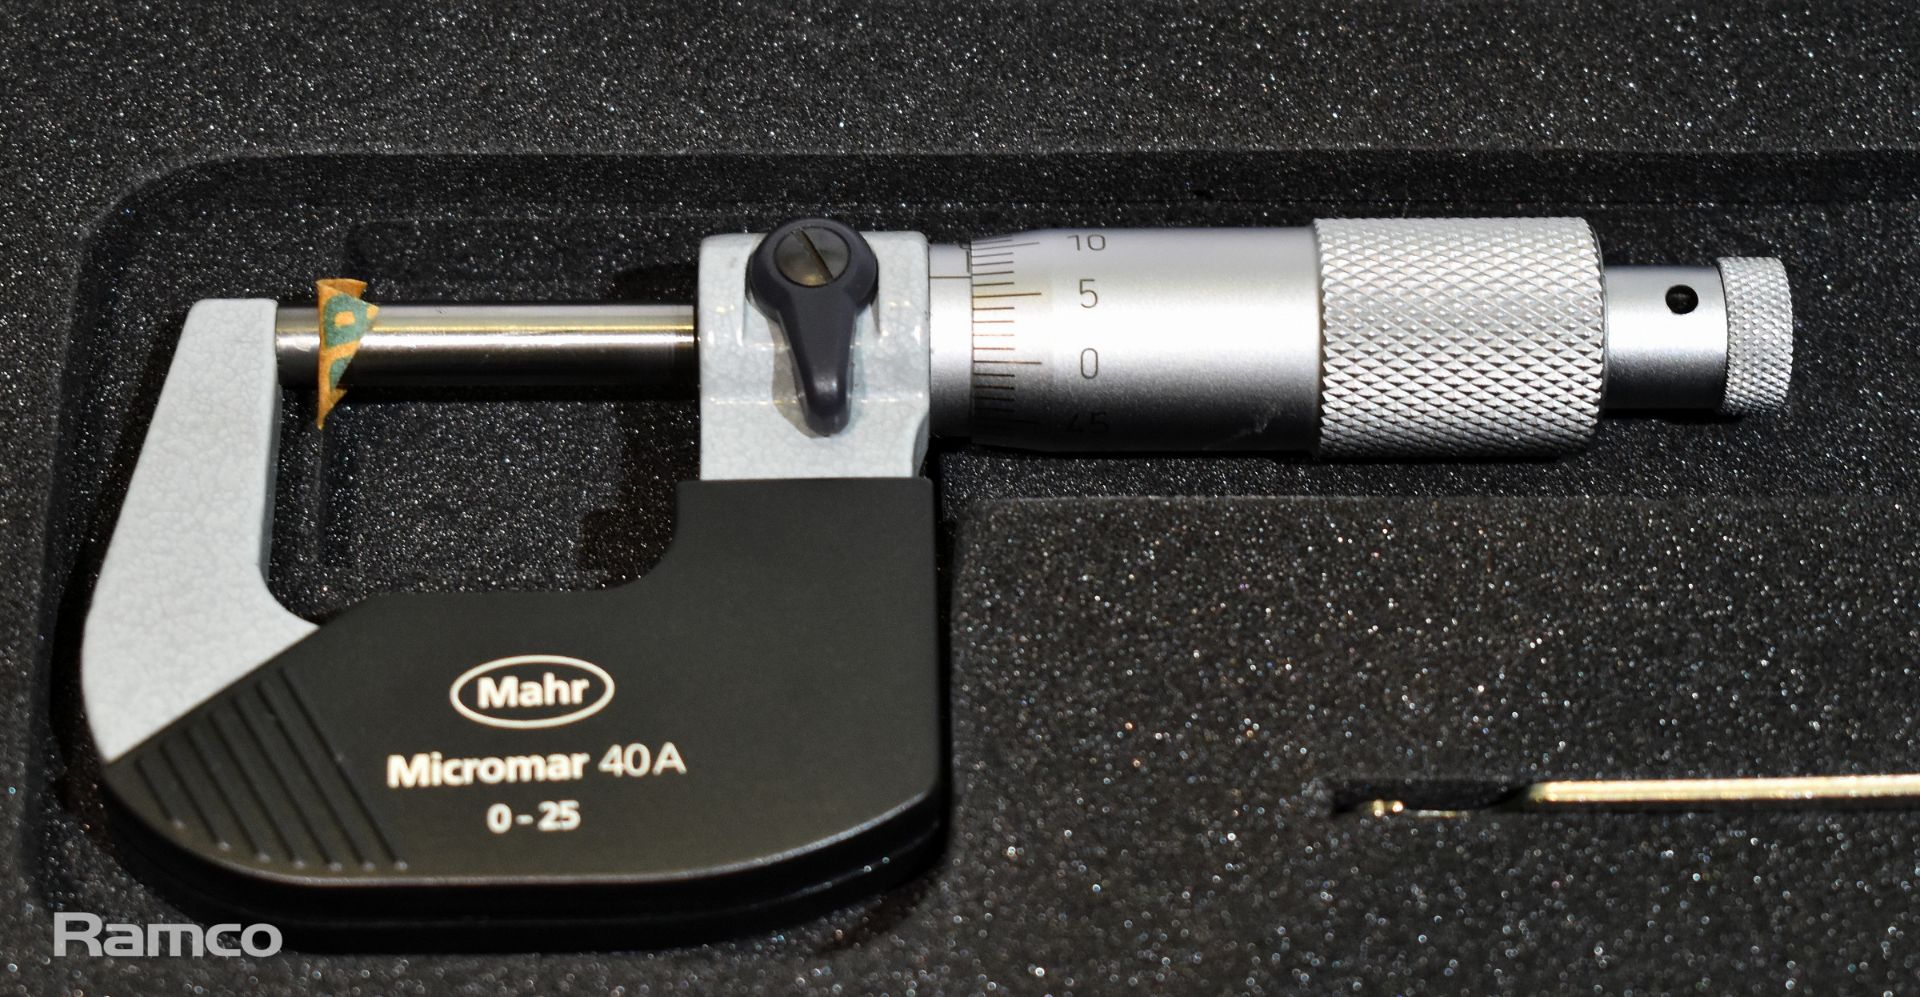 2x Mahr Micrometers 40 A 0-25mm - Image 2 of 3